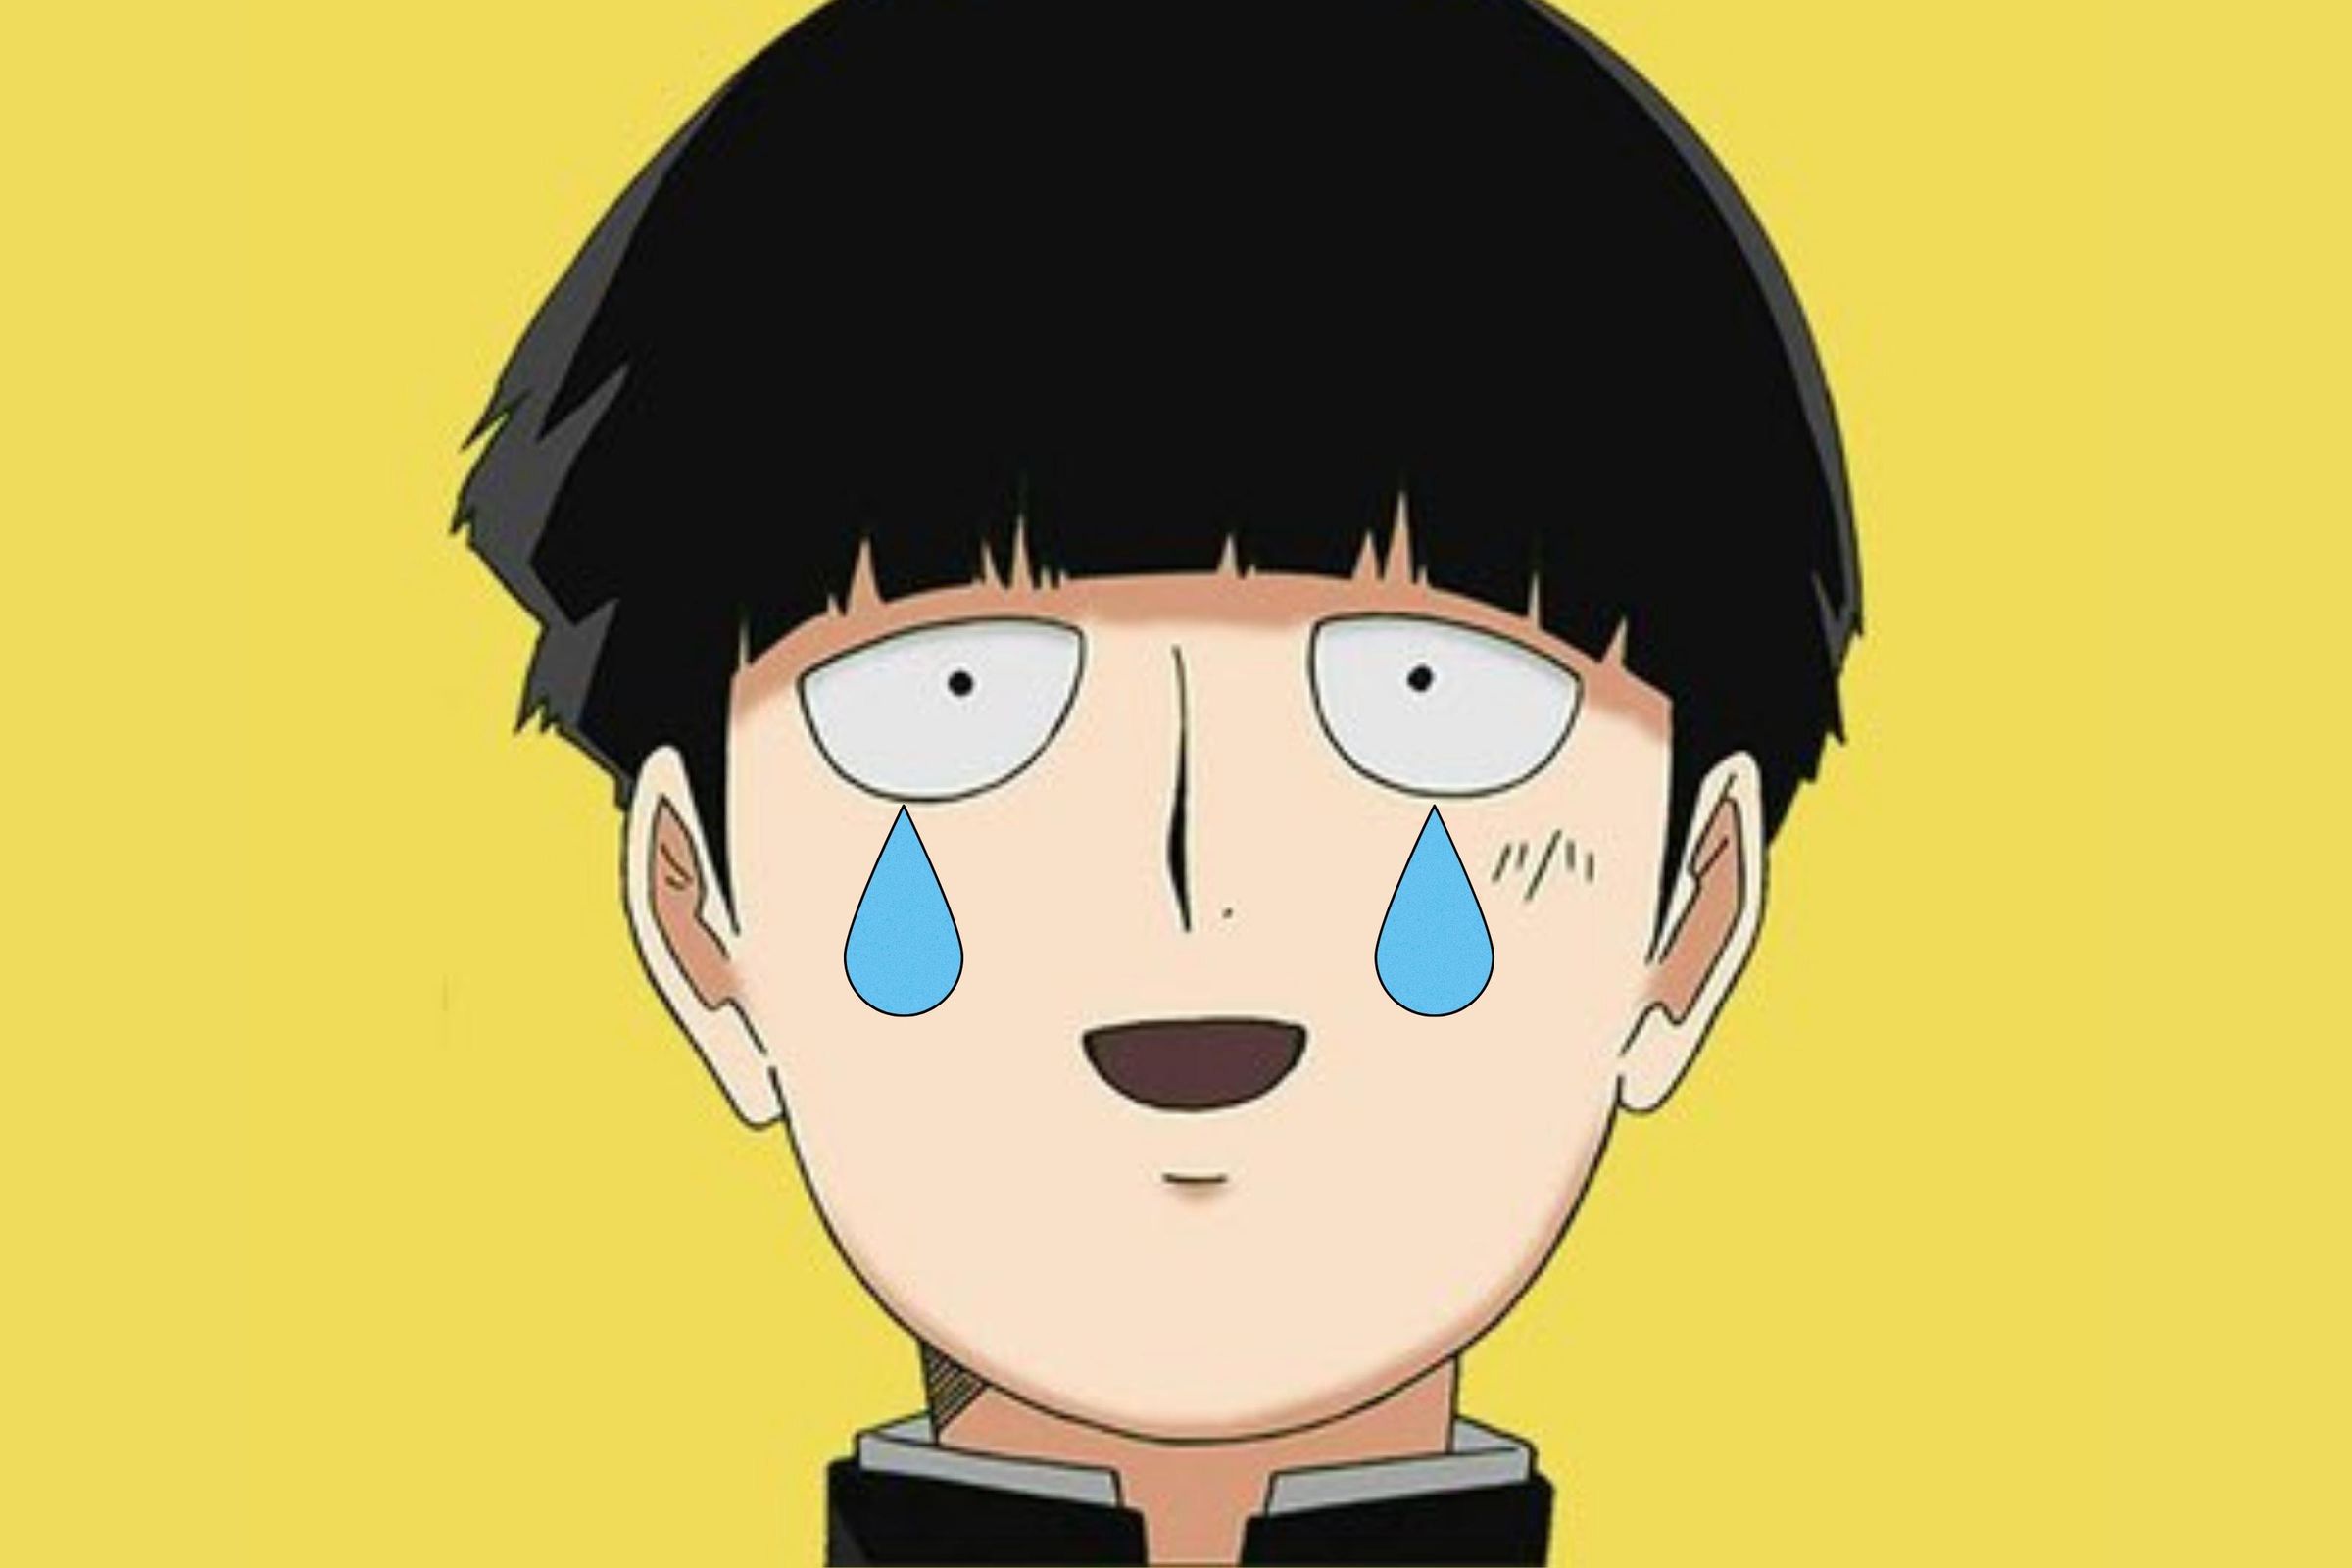 Mob (real name Shigeo Kageyama), an anime character from the show Mob Psycho against a yellow background with tears falling down his face.